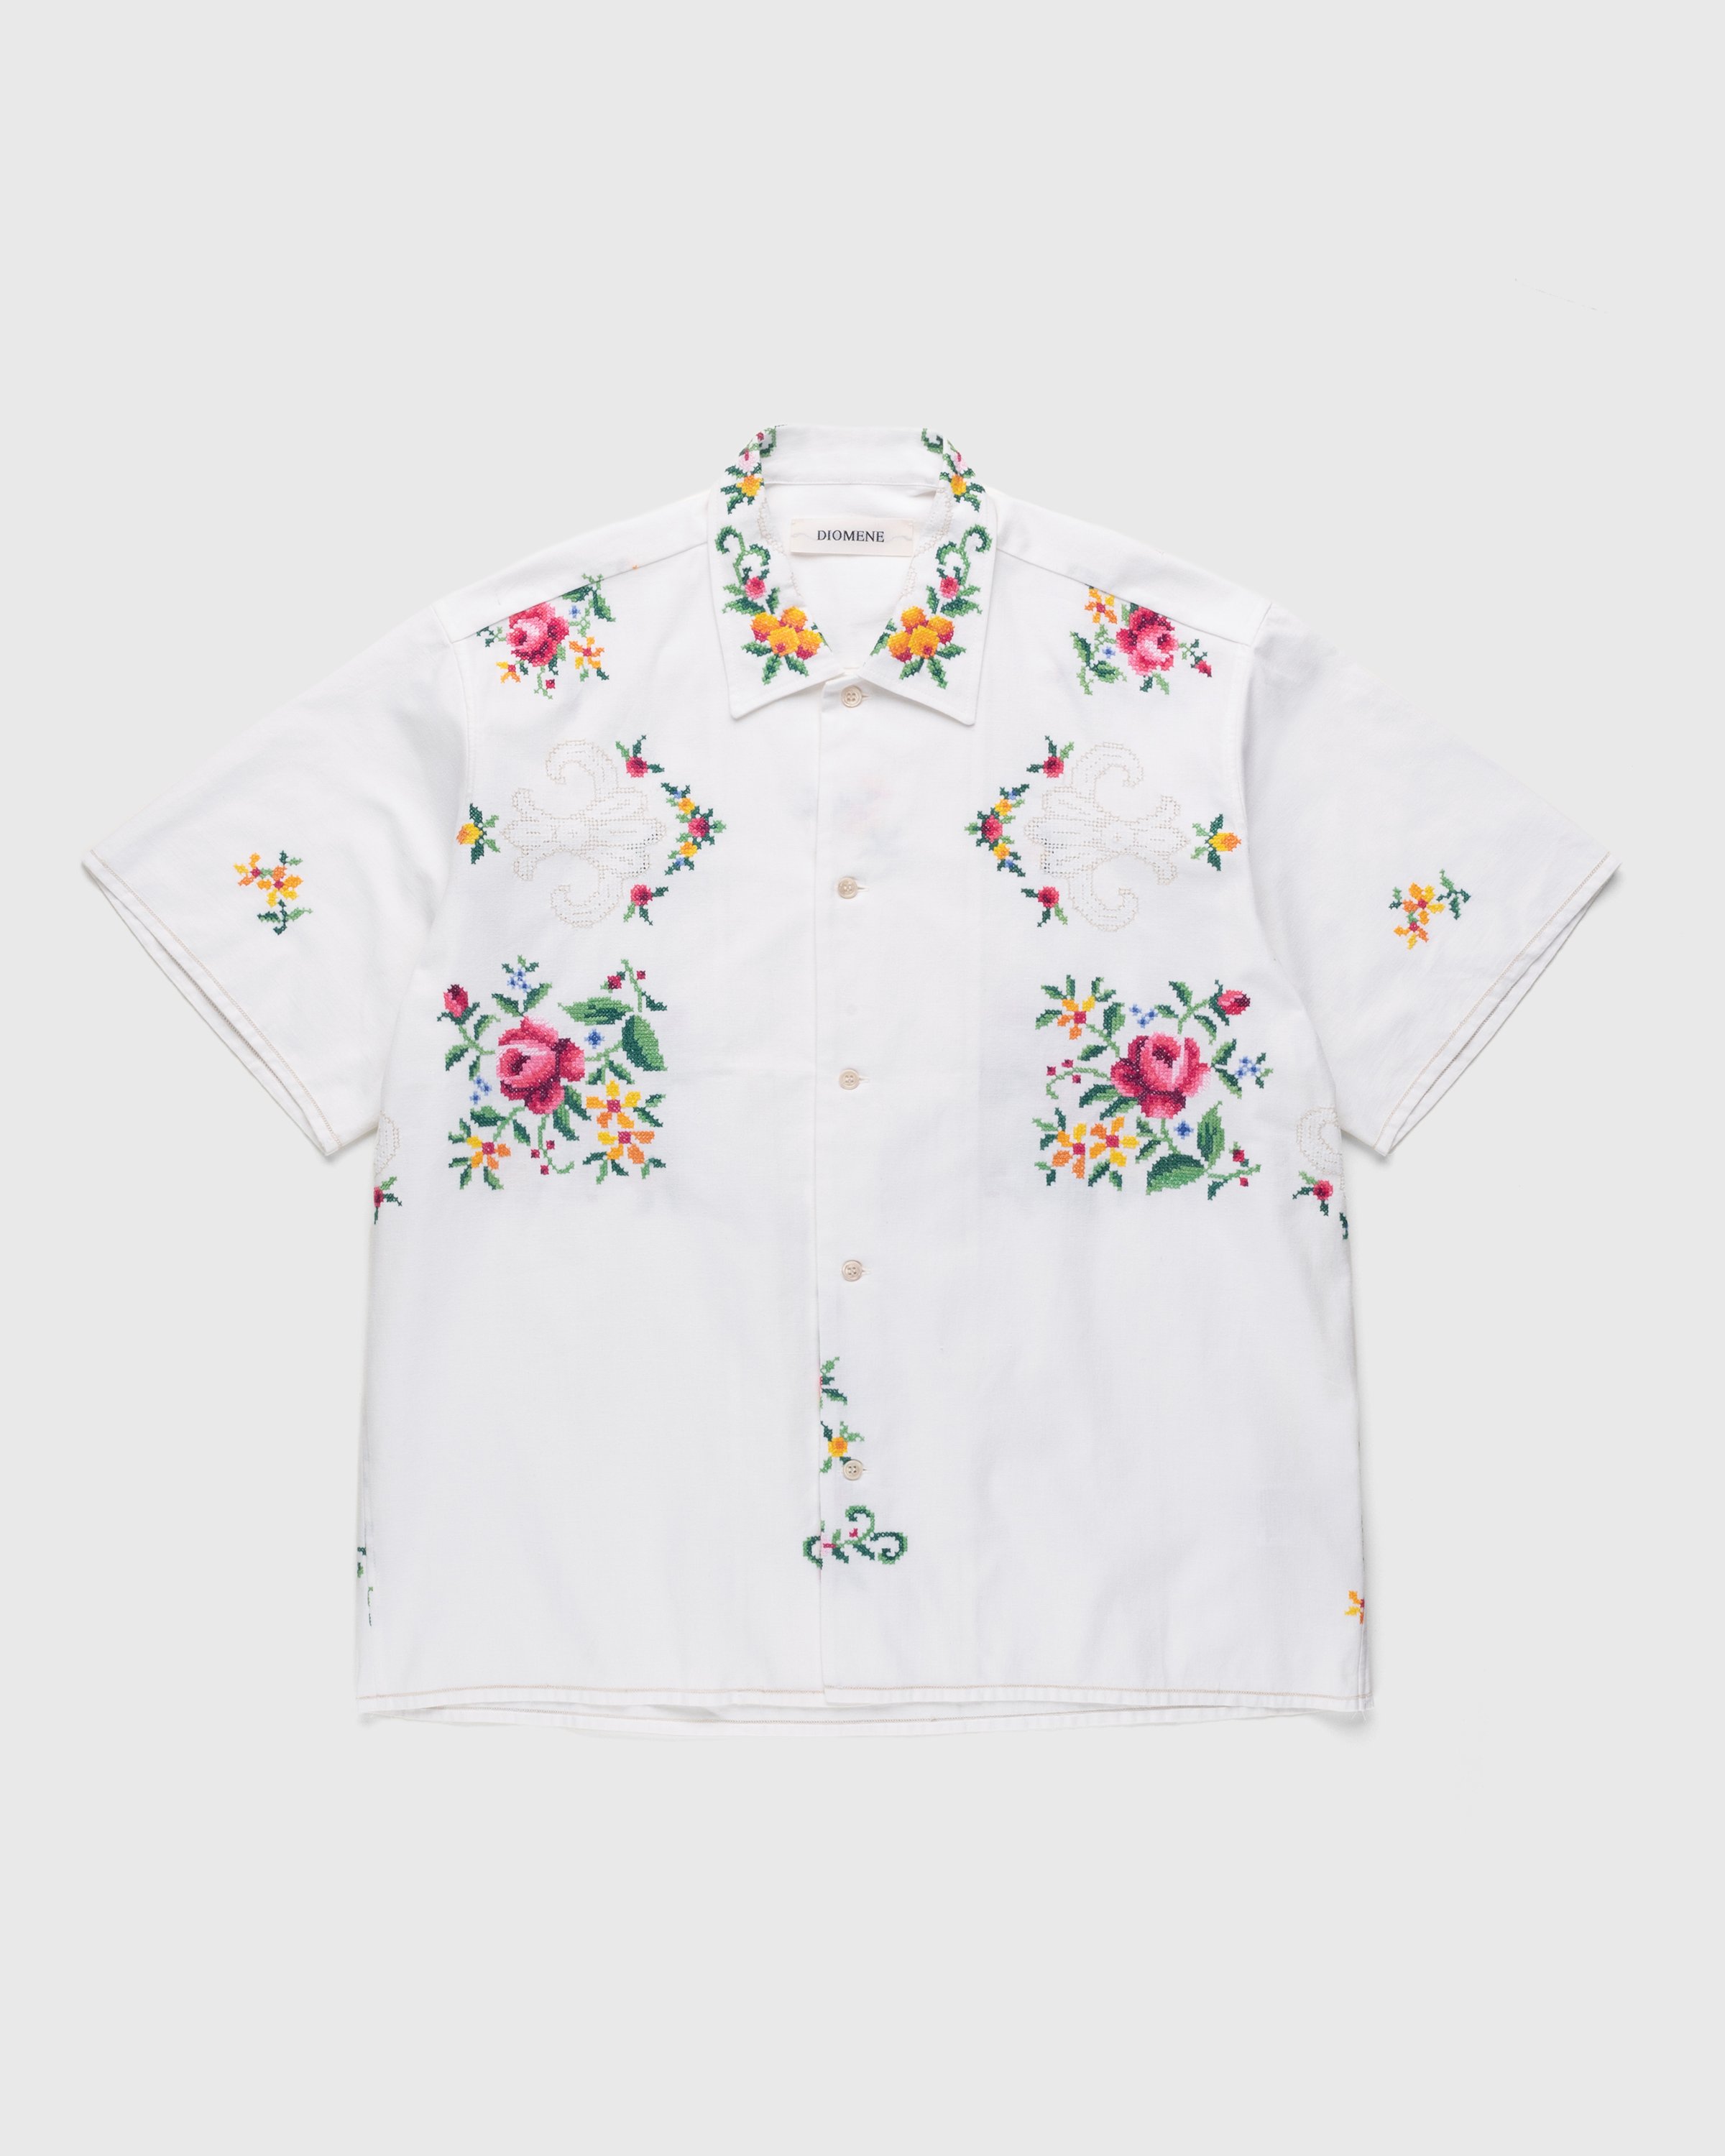 Diomene by Damir Doma - Embroidered Vacation Shirt White/Green - Clothing - White - Image 1